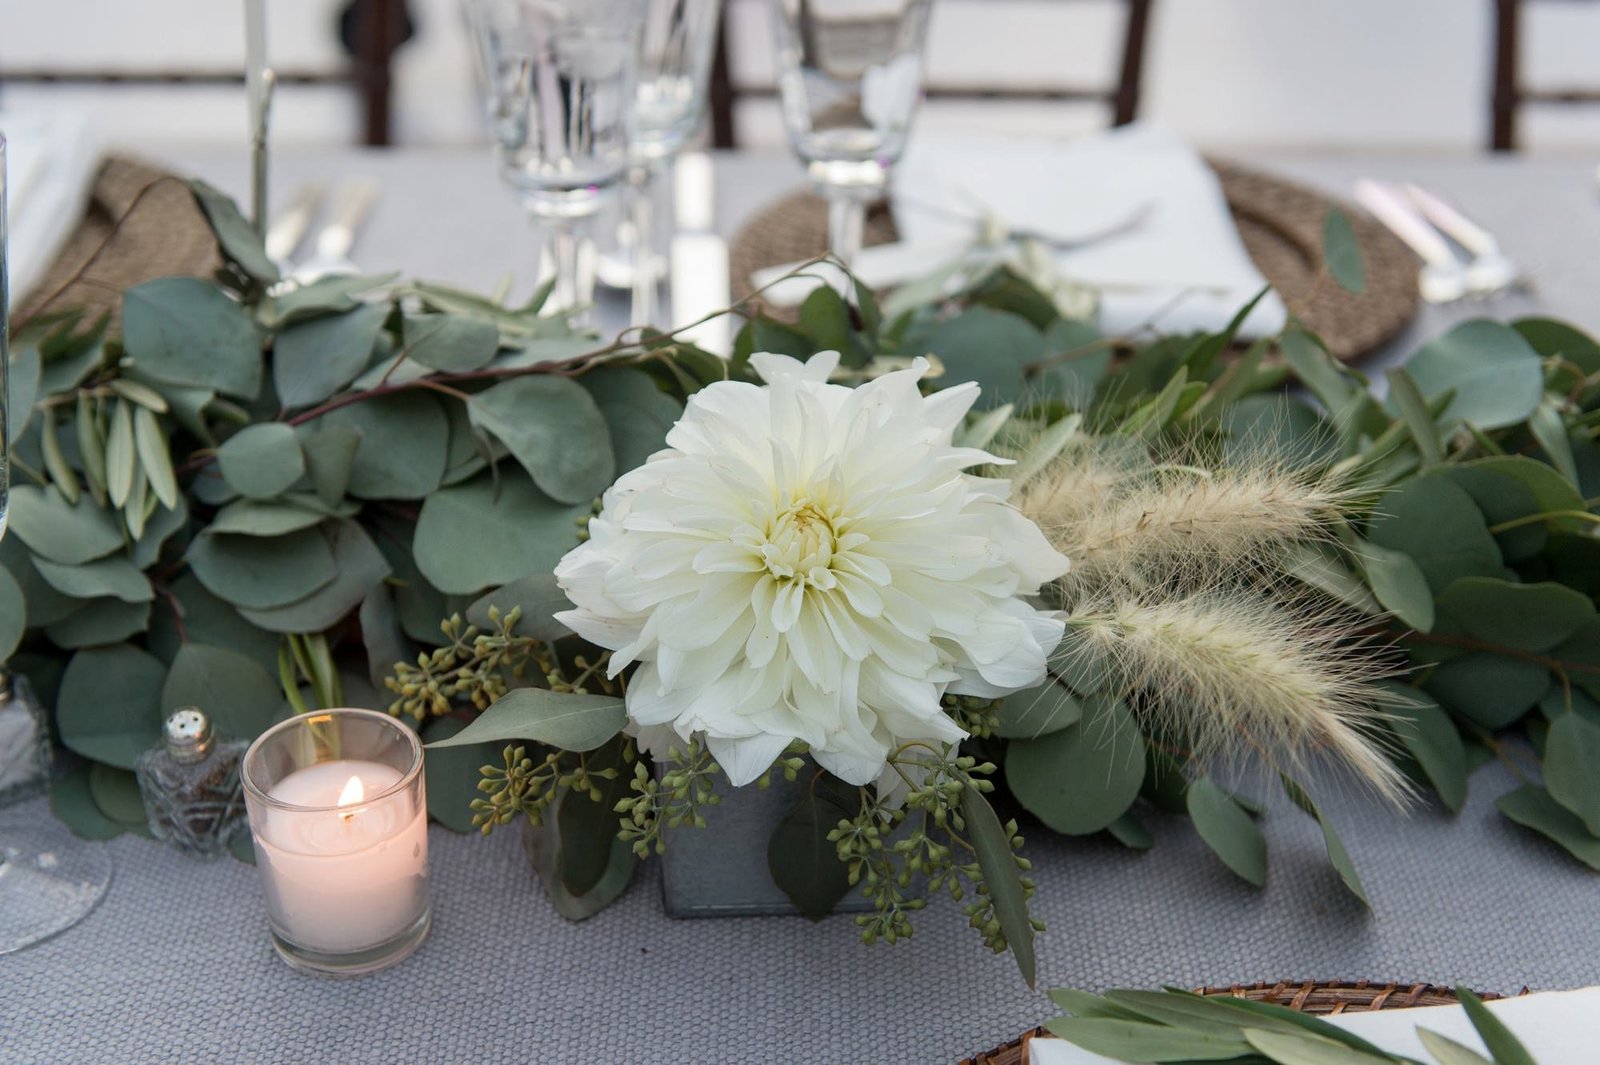 Rustic and elegant table for a home wedding in Washington, CT